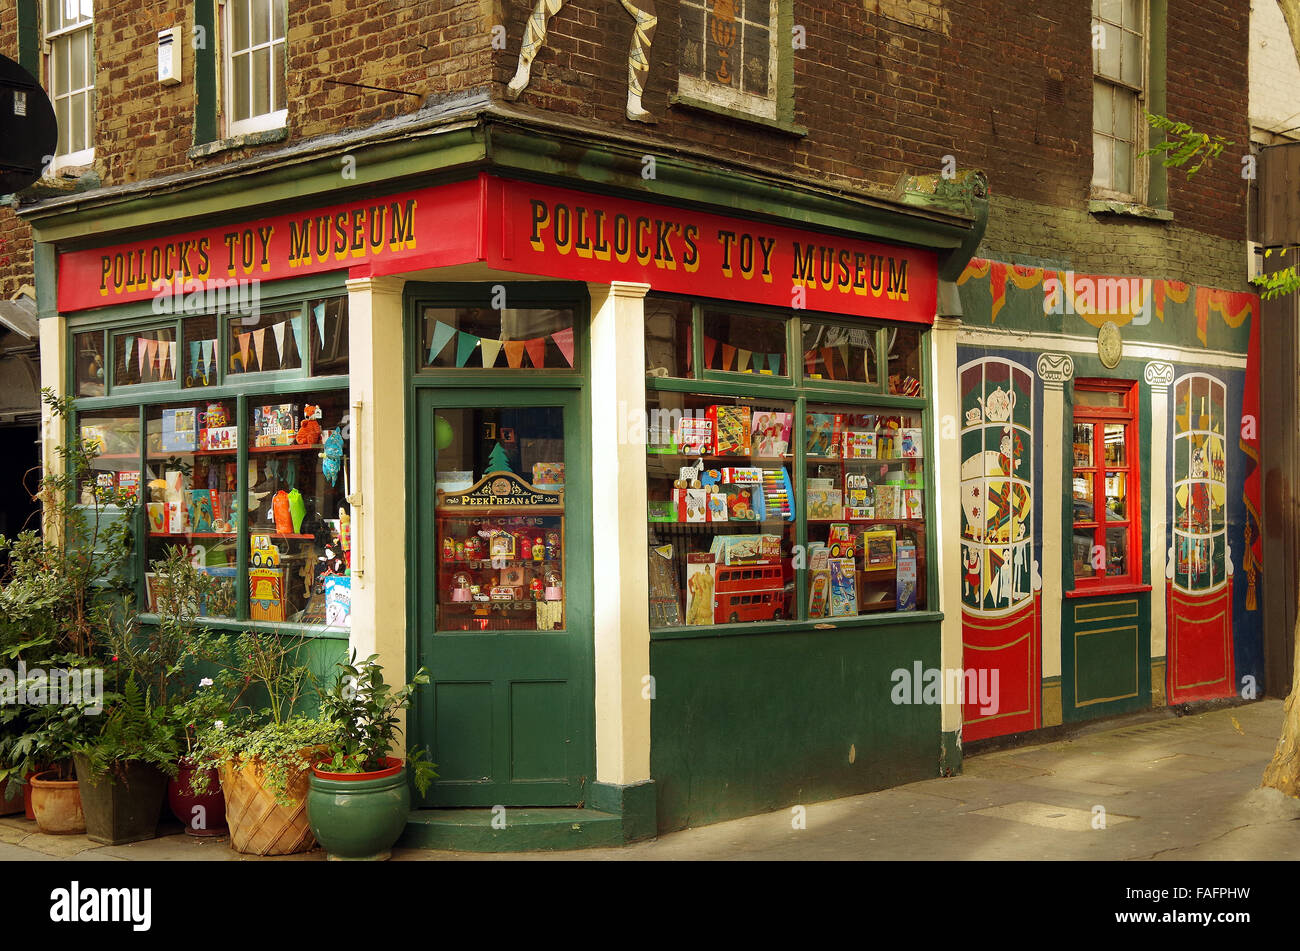 London Pollocks Toy Museum Traditional toys, games Stock Photo